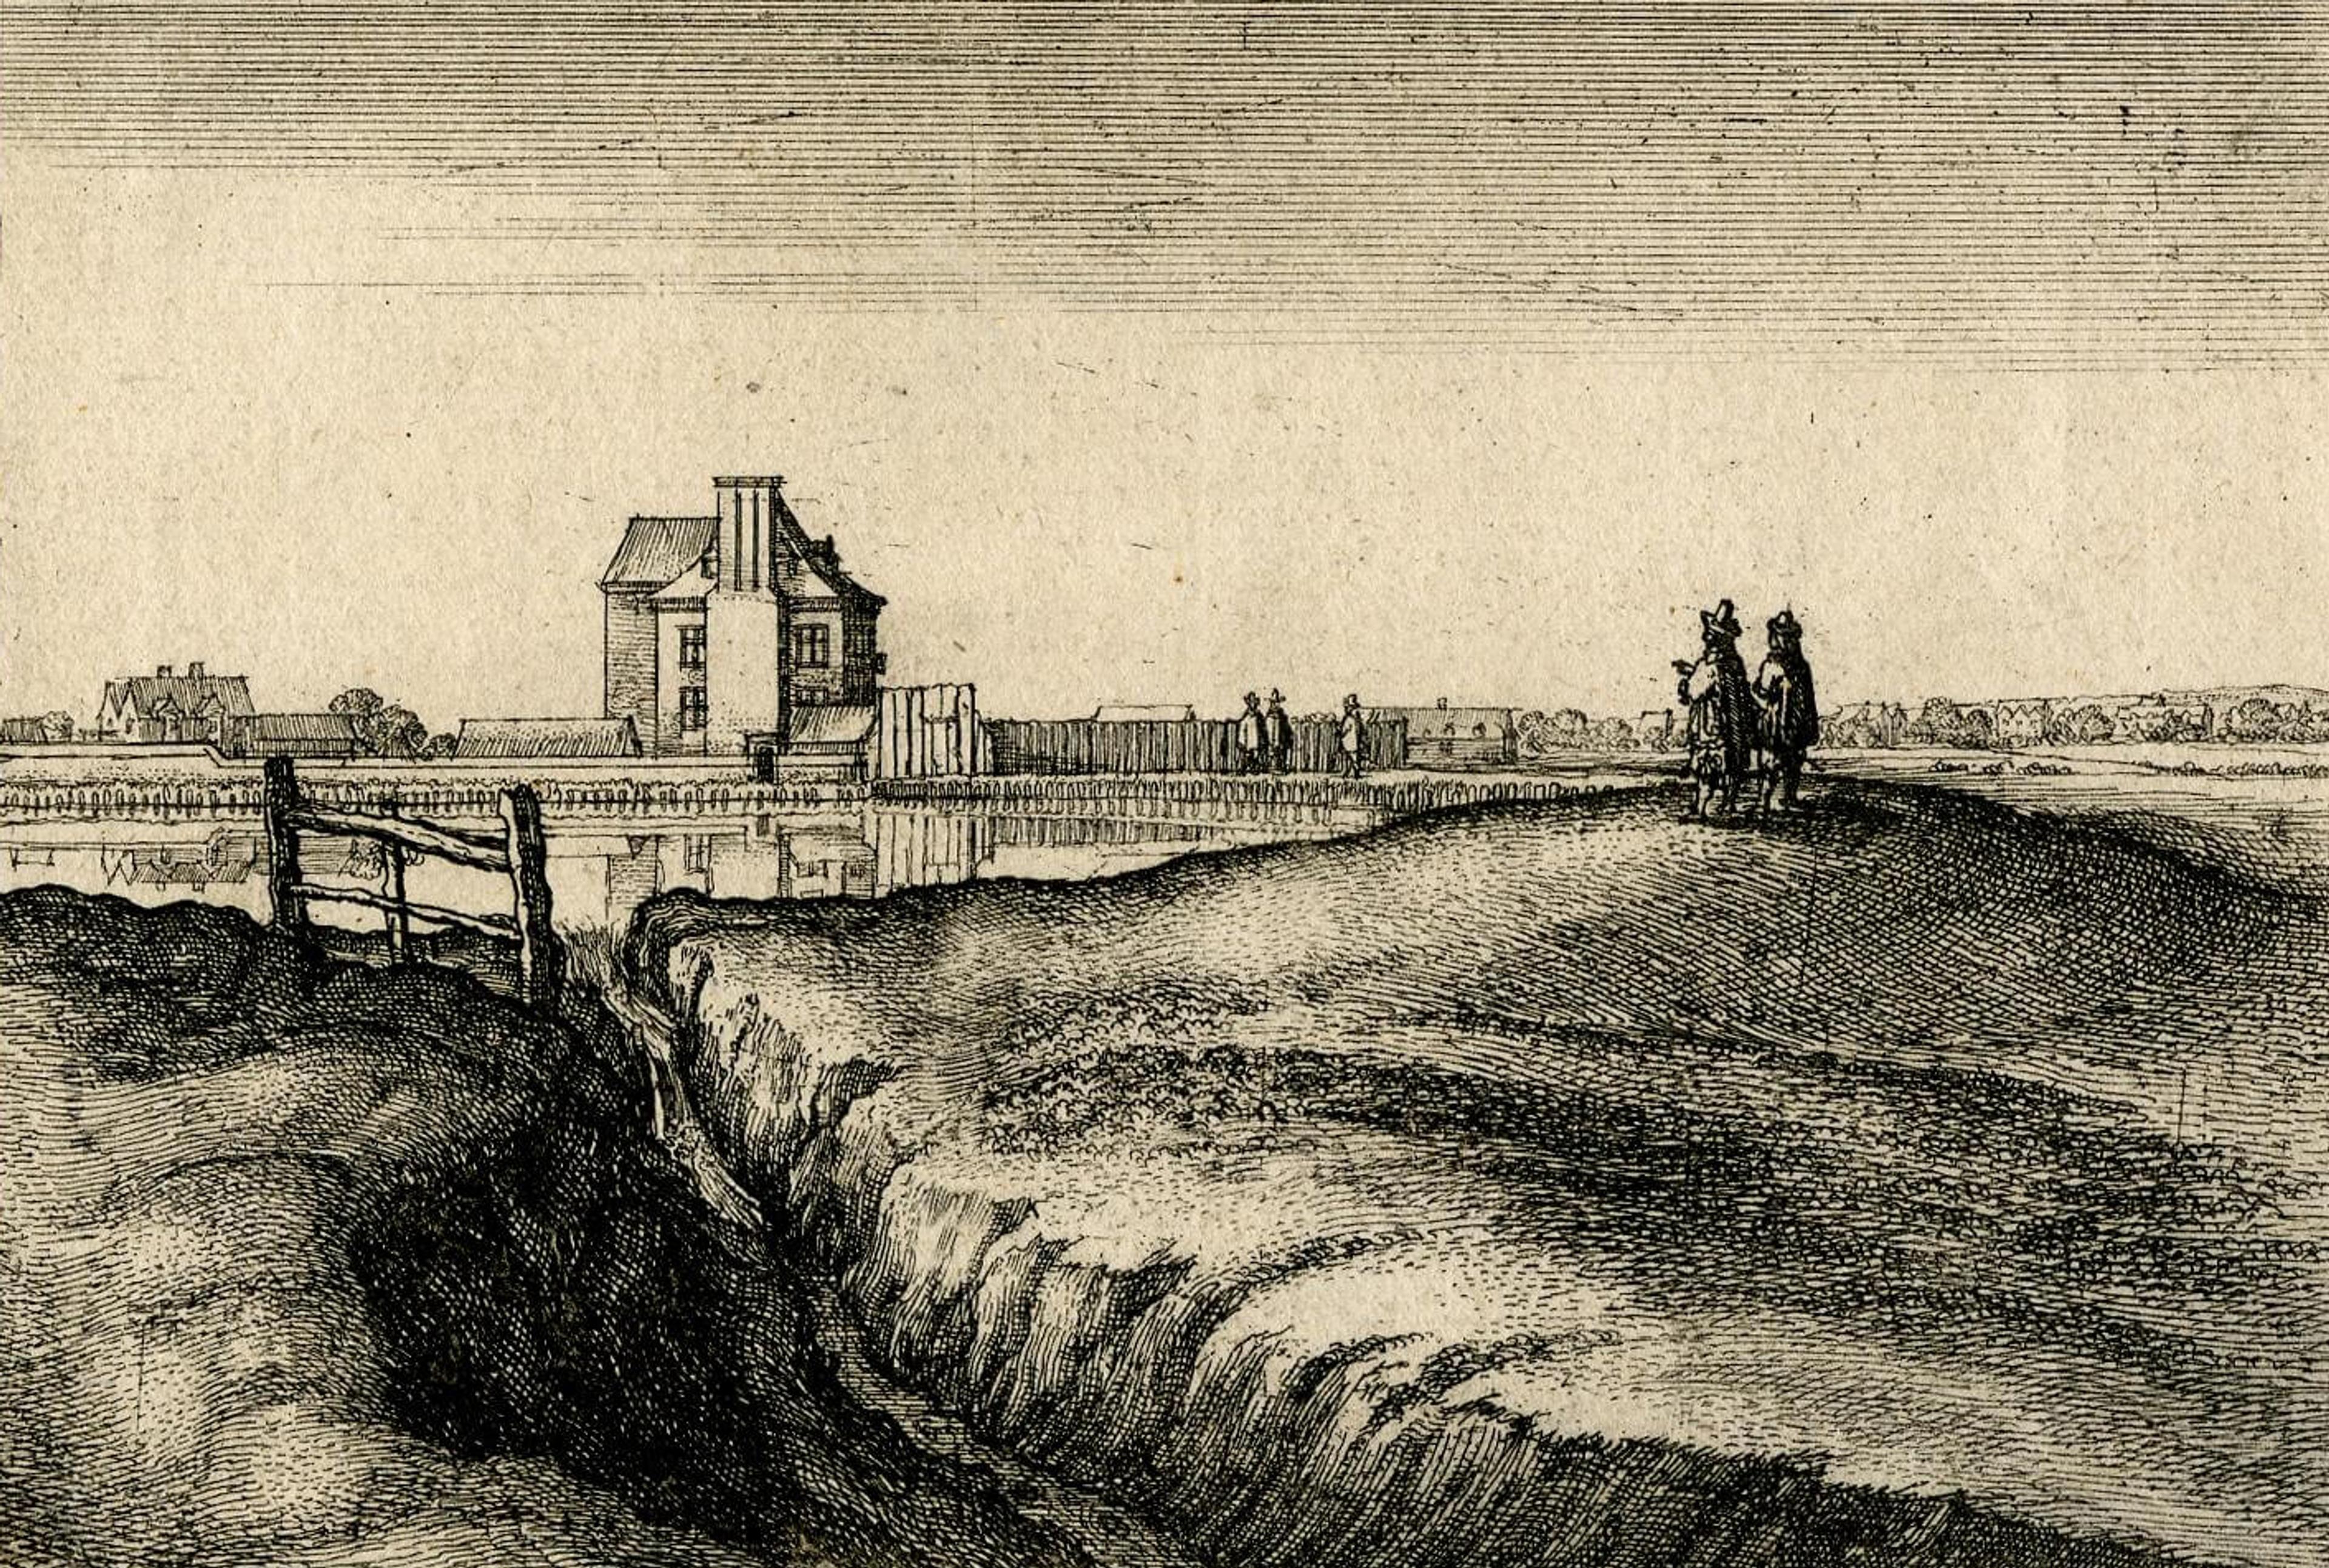 Etching of two people looking out onto a pond with a house in the distance